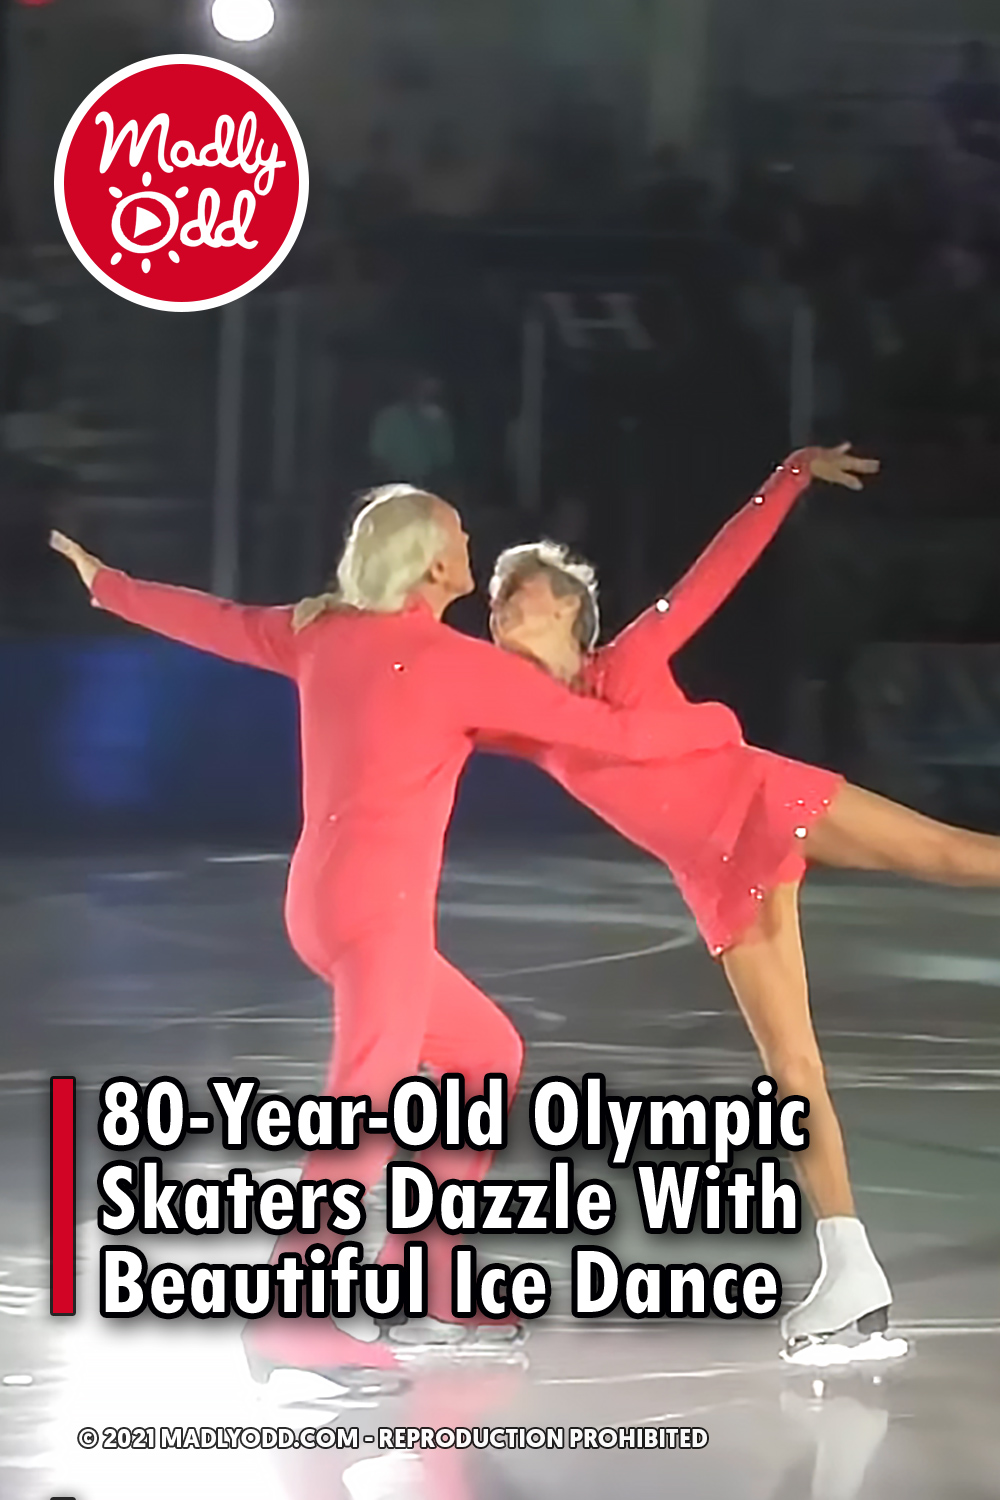 80-Year-Old Olympic Skaters Dazzle With Beautiful Ice Dance